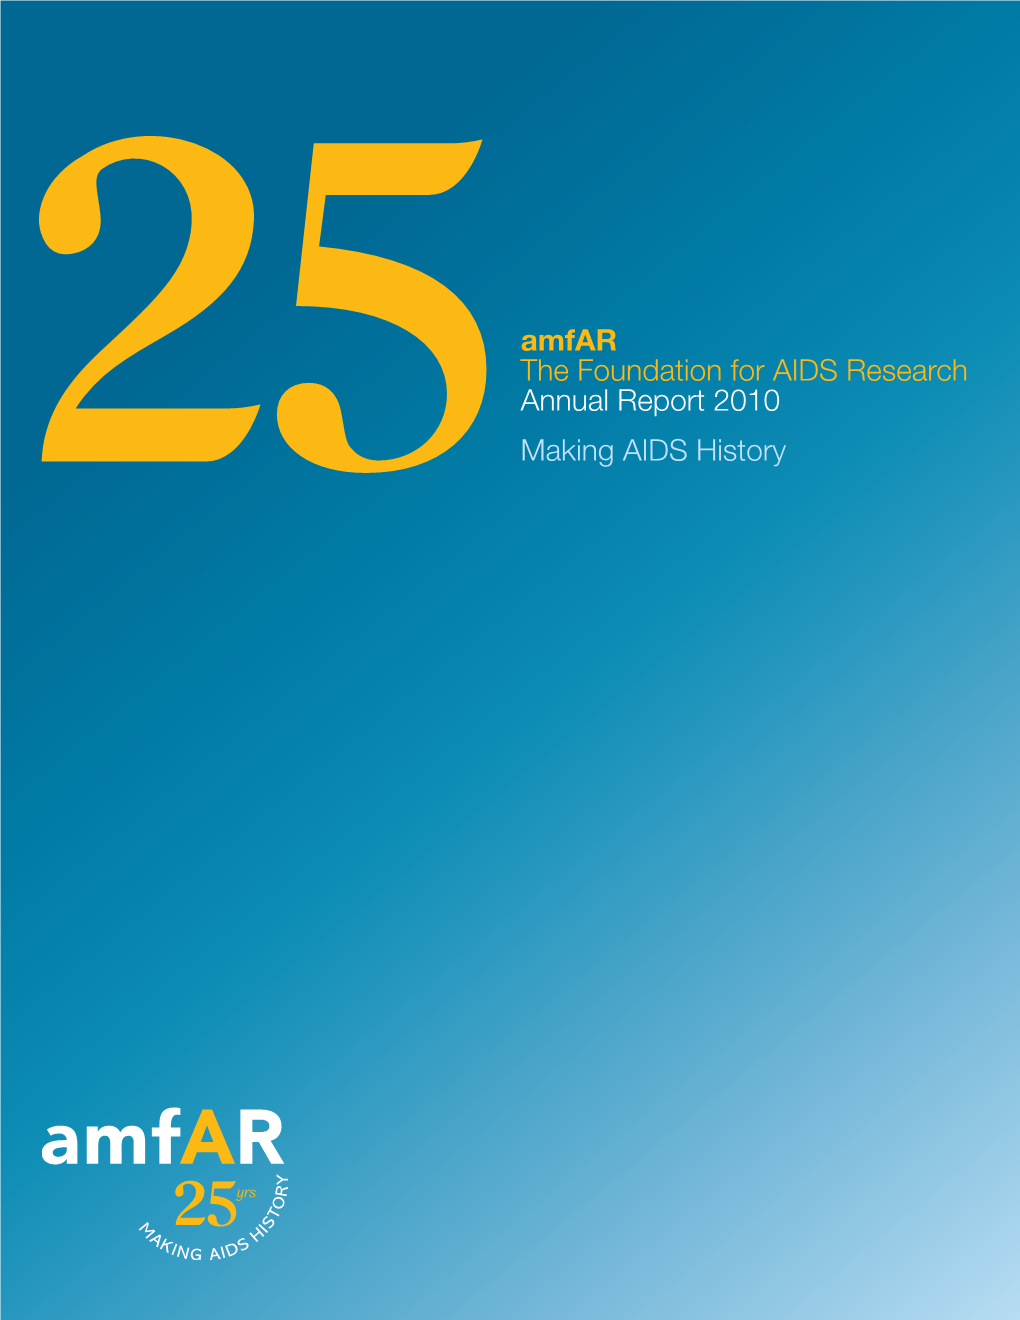 Amfar the Foundation for AIDS Research Annual Report 2010 Making AIDS History Contents